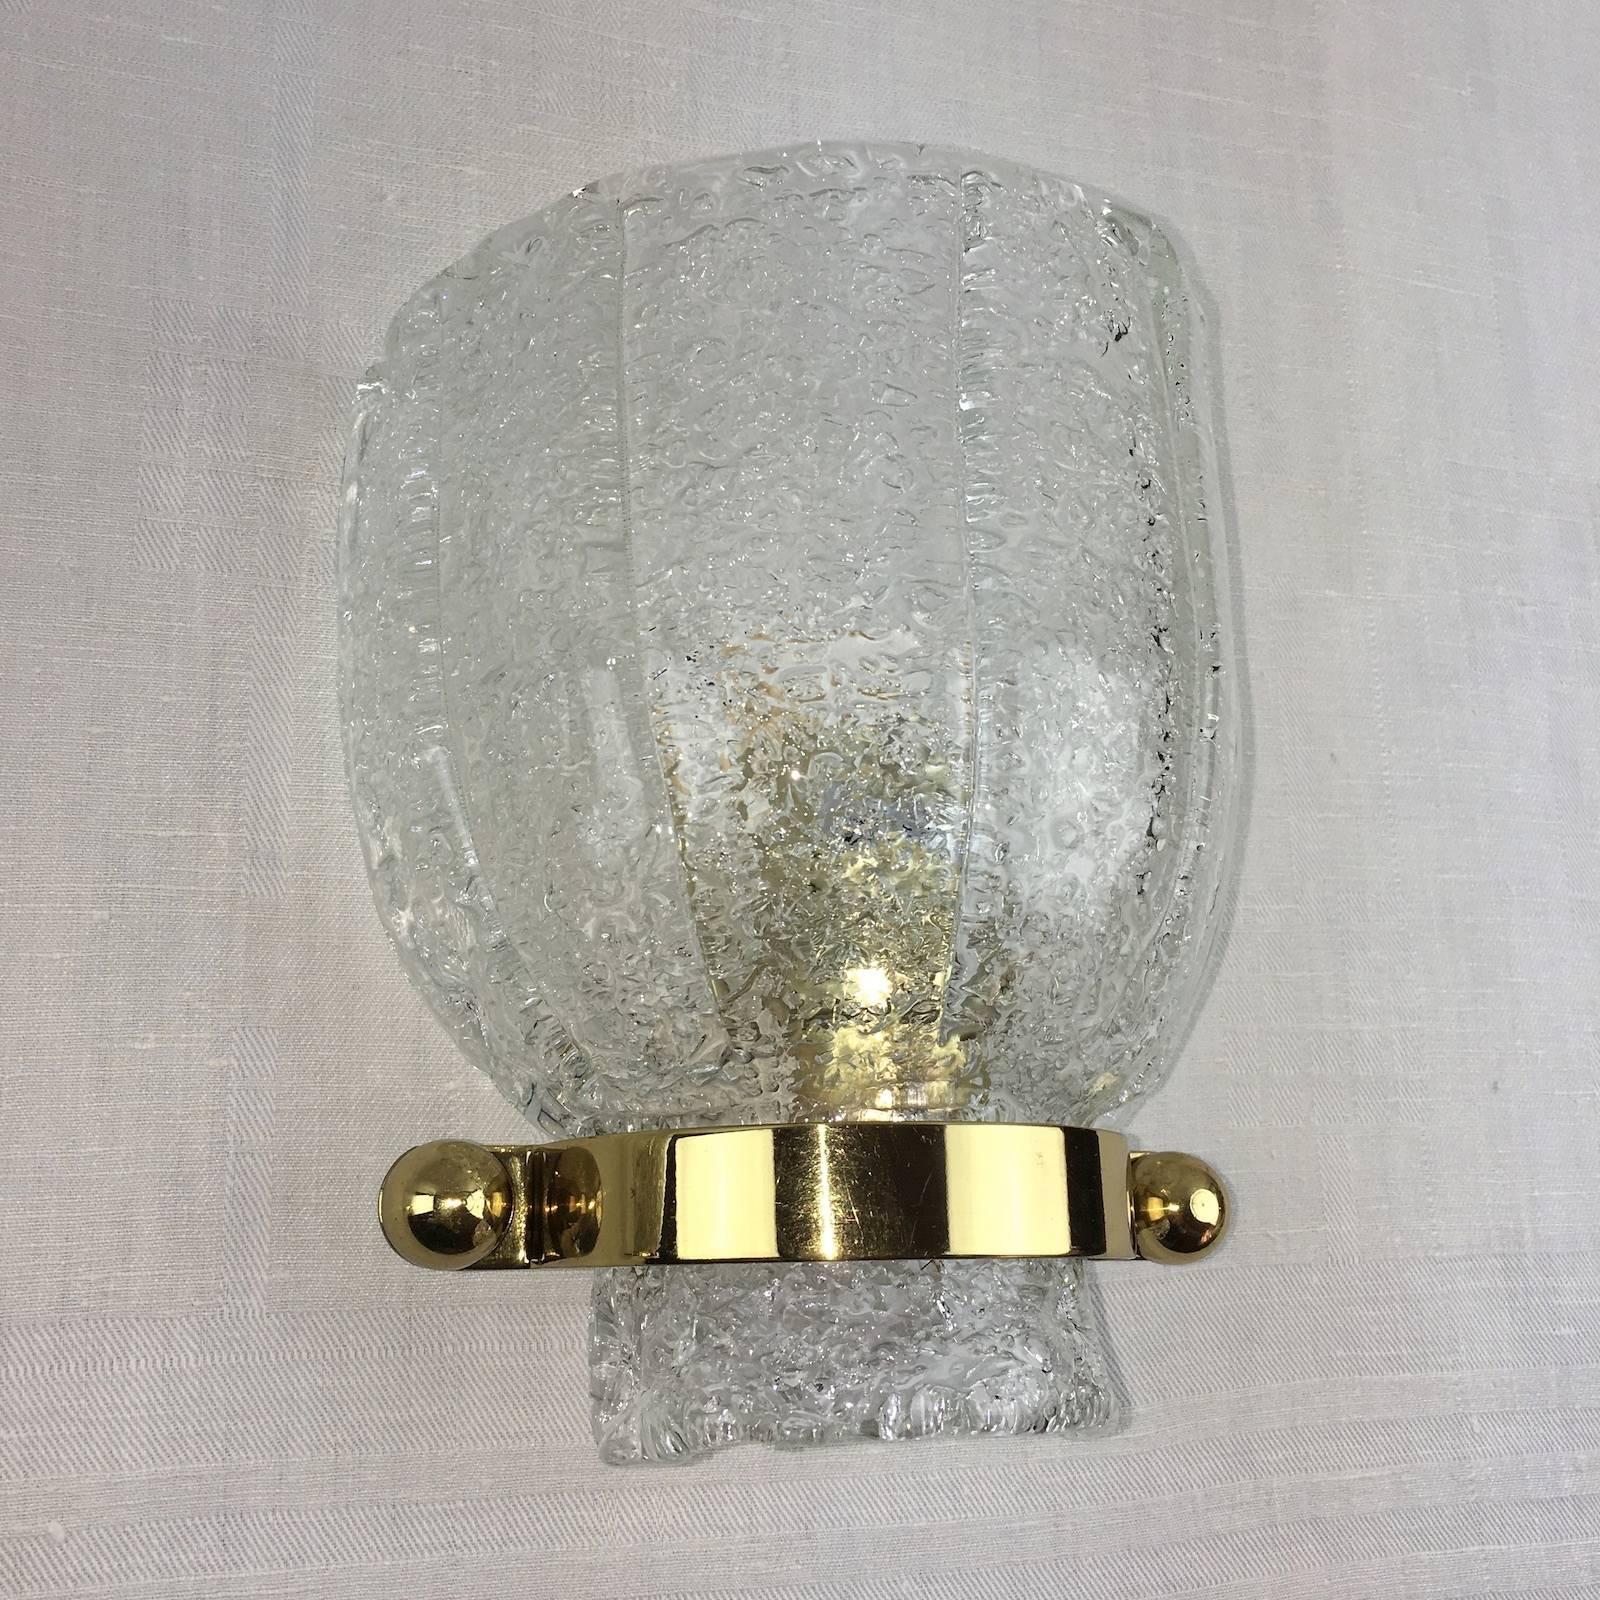 A pair of 1960s Calyx form sconces, made by Hillebrand, in textured glass, holder with a polished brass and metal frame. Each fixture requires one European E27 Edison bulb, each bulb up to 60 watts.